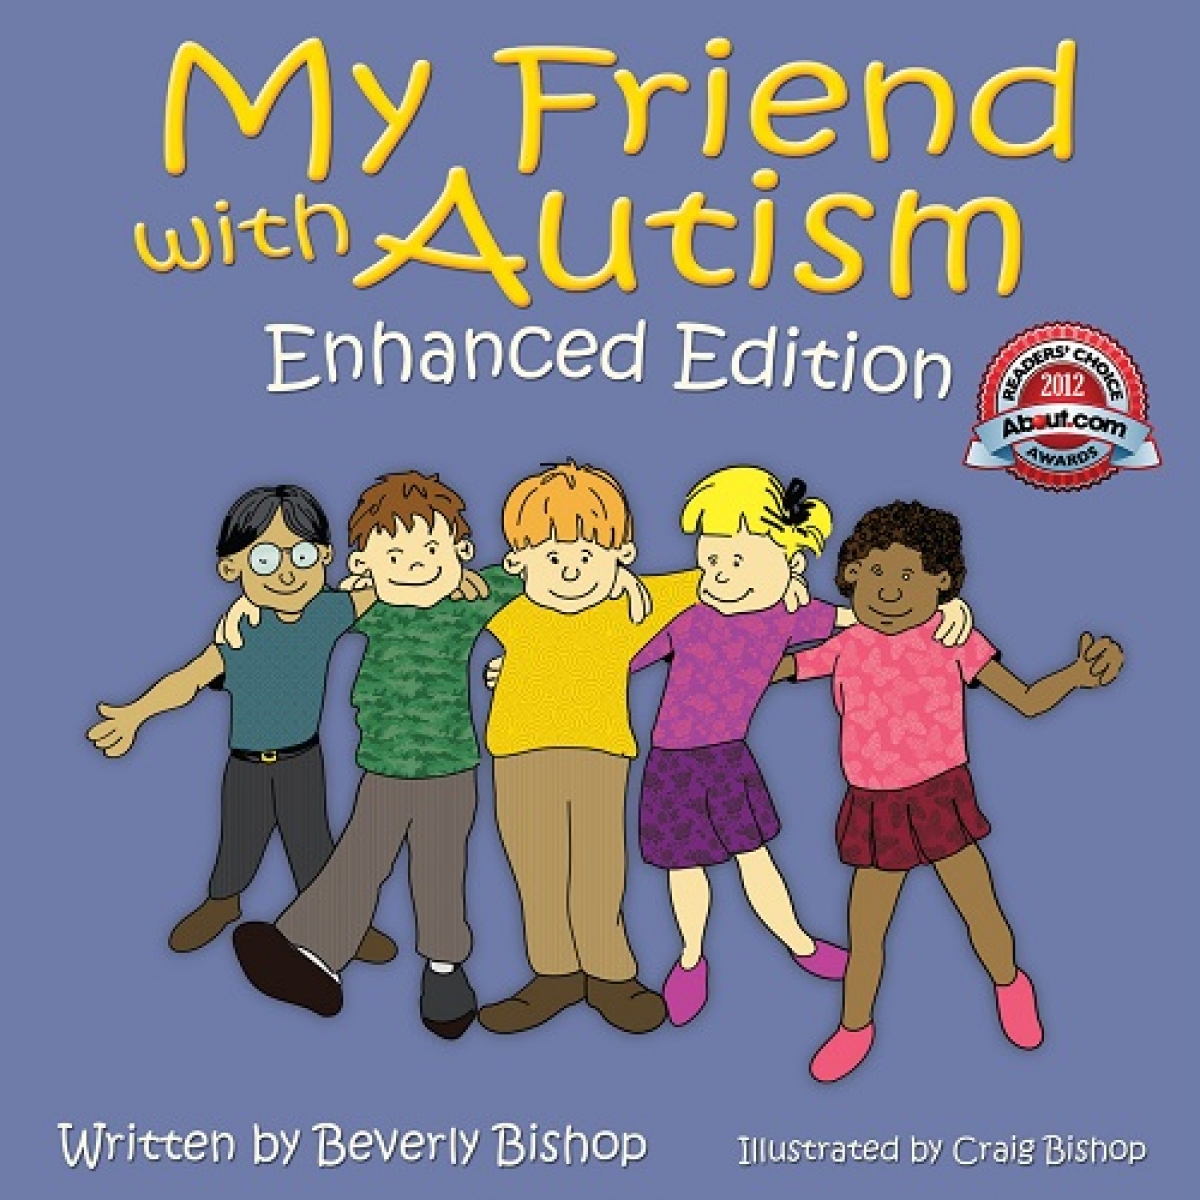 My Friend With Autism: Enhanced Edition - Autism Books